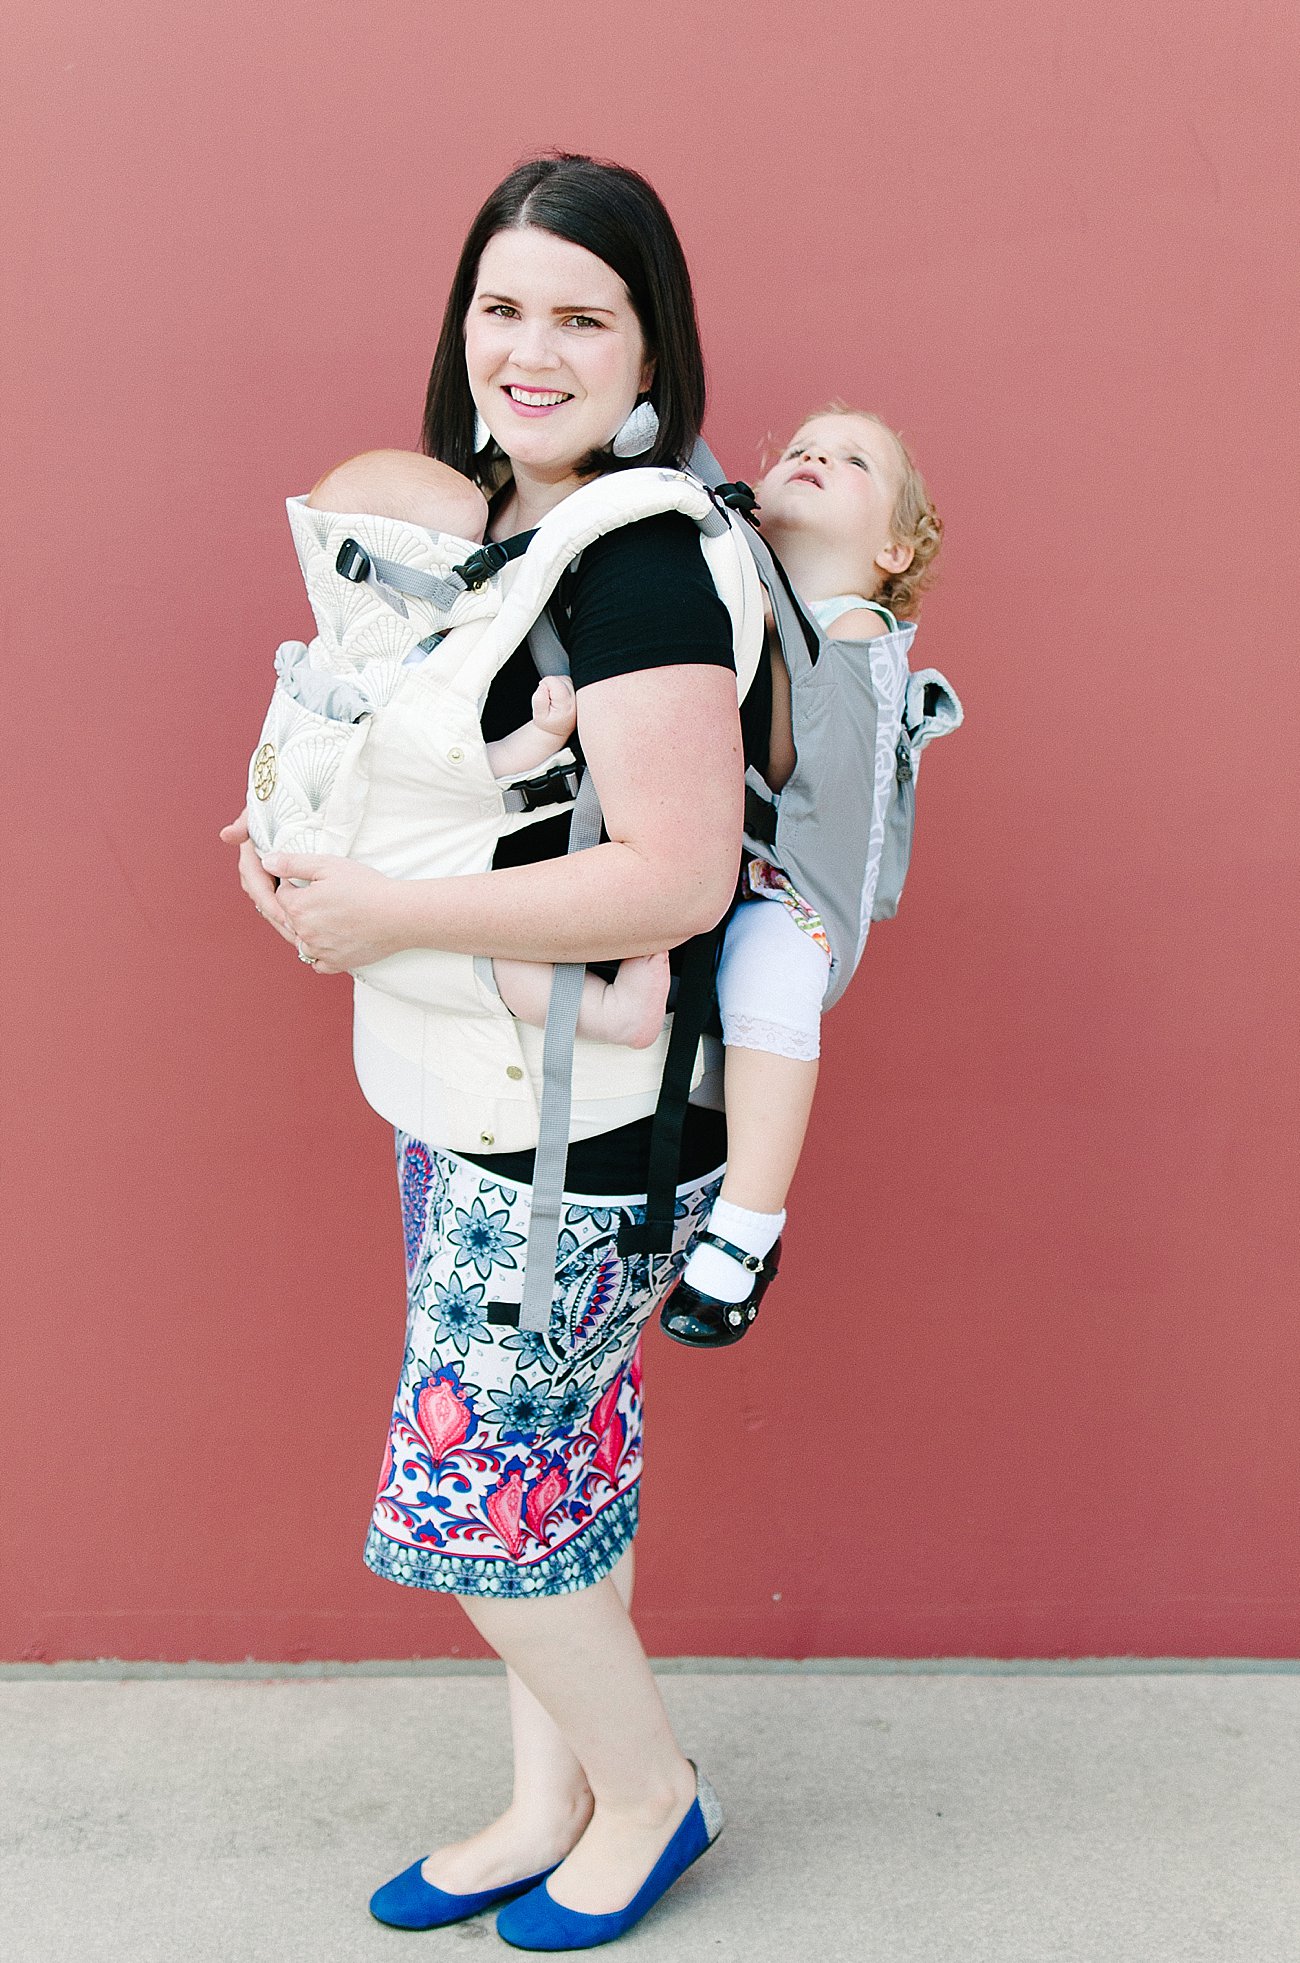 with Lillebaby Complete & CarryOn Baby Carriers #babywearing #tandemwearing #toddlerwearing (5)